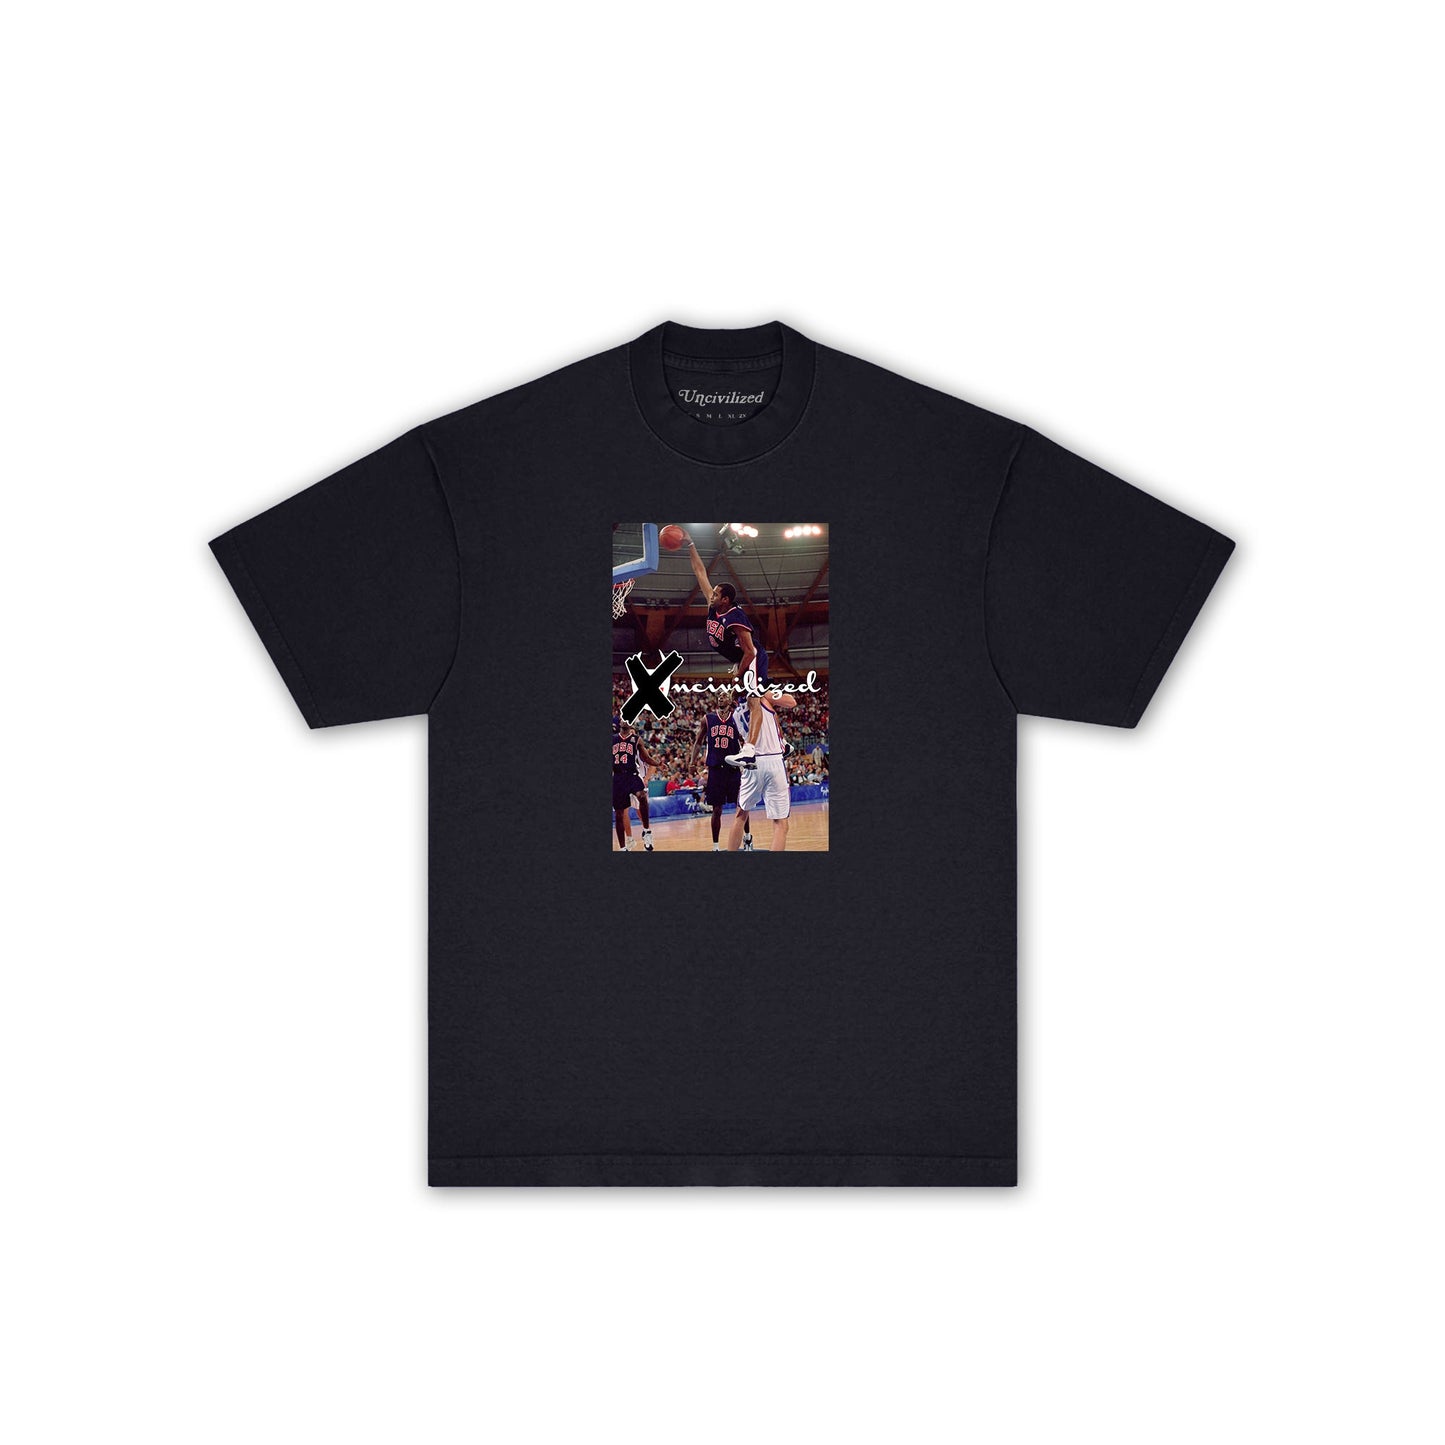 EARLY ACCESS: UNCIVILIZED "VINSANITY" T-SHIRT